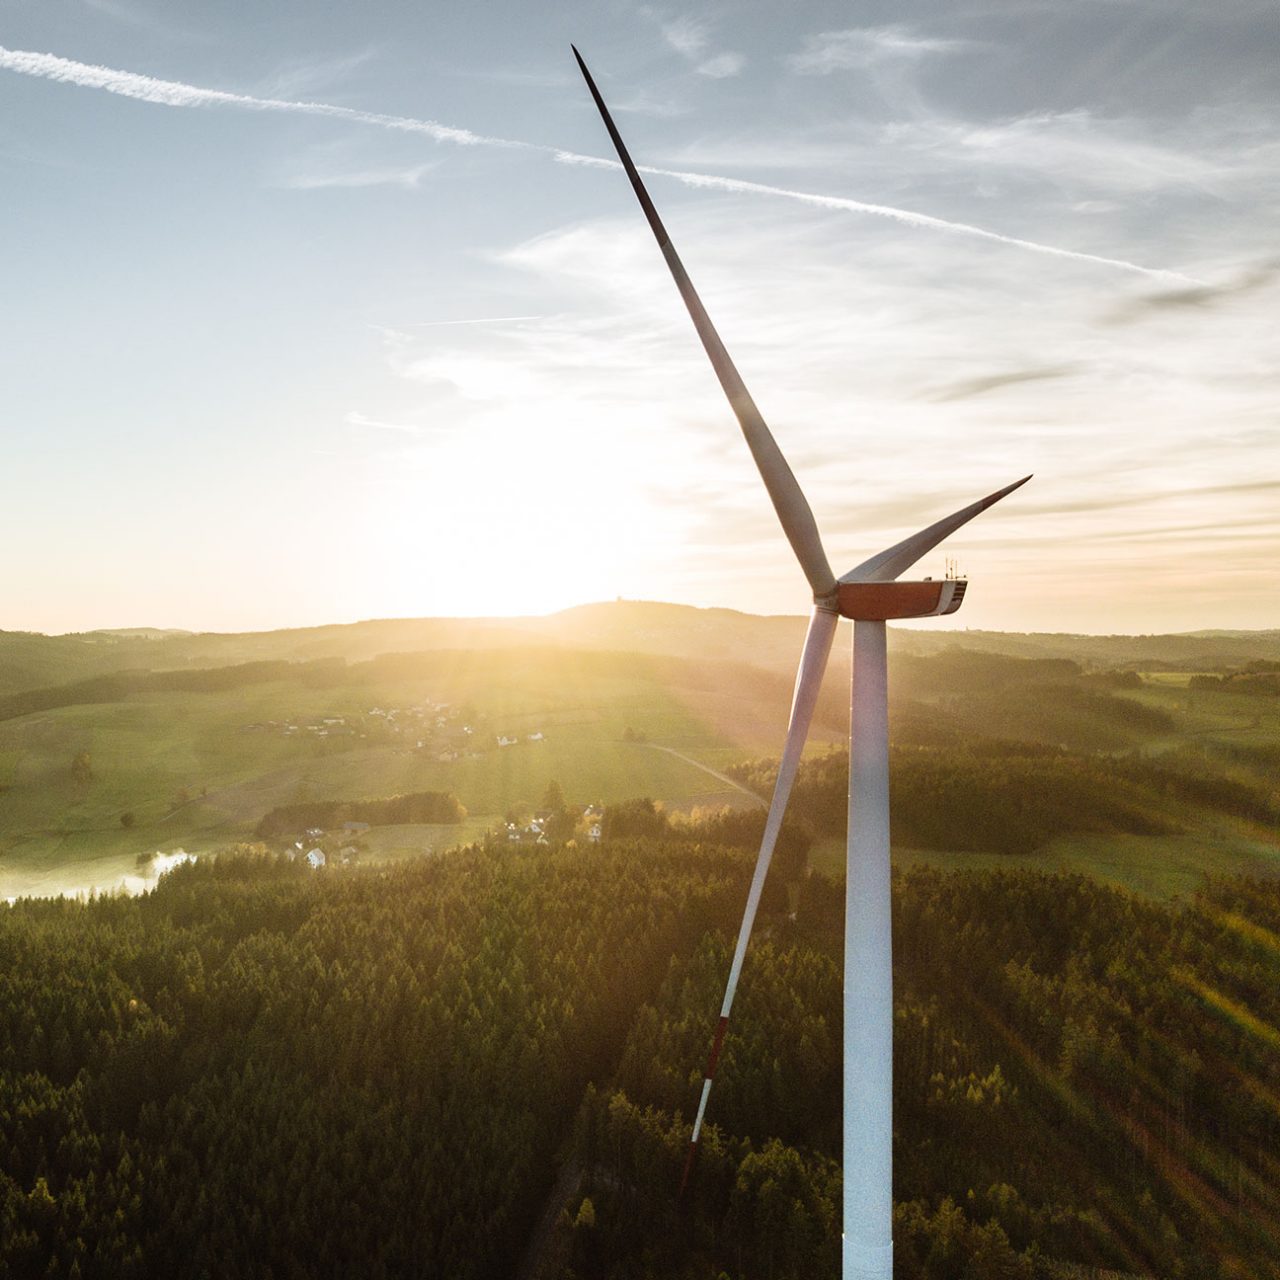 Aerial view of wind turbine in the sunset overlooking green fields